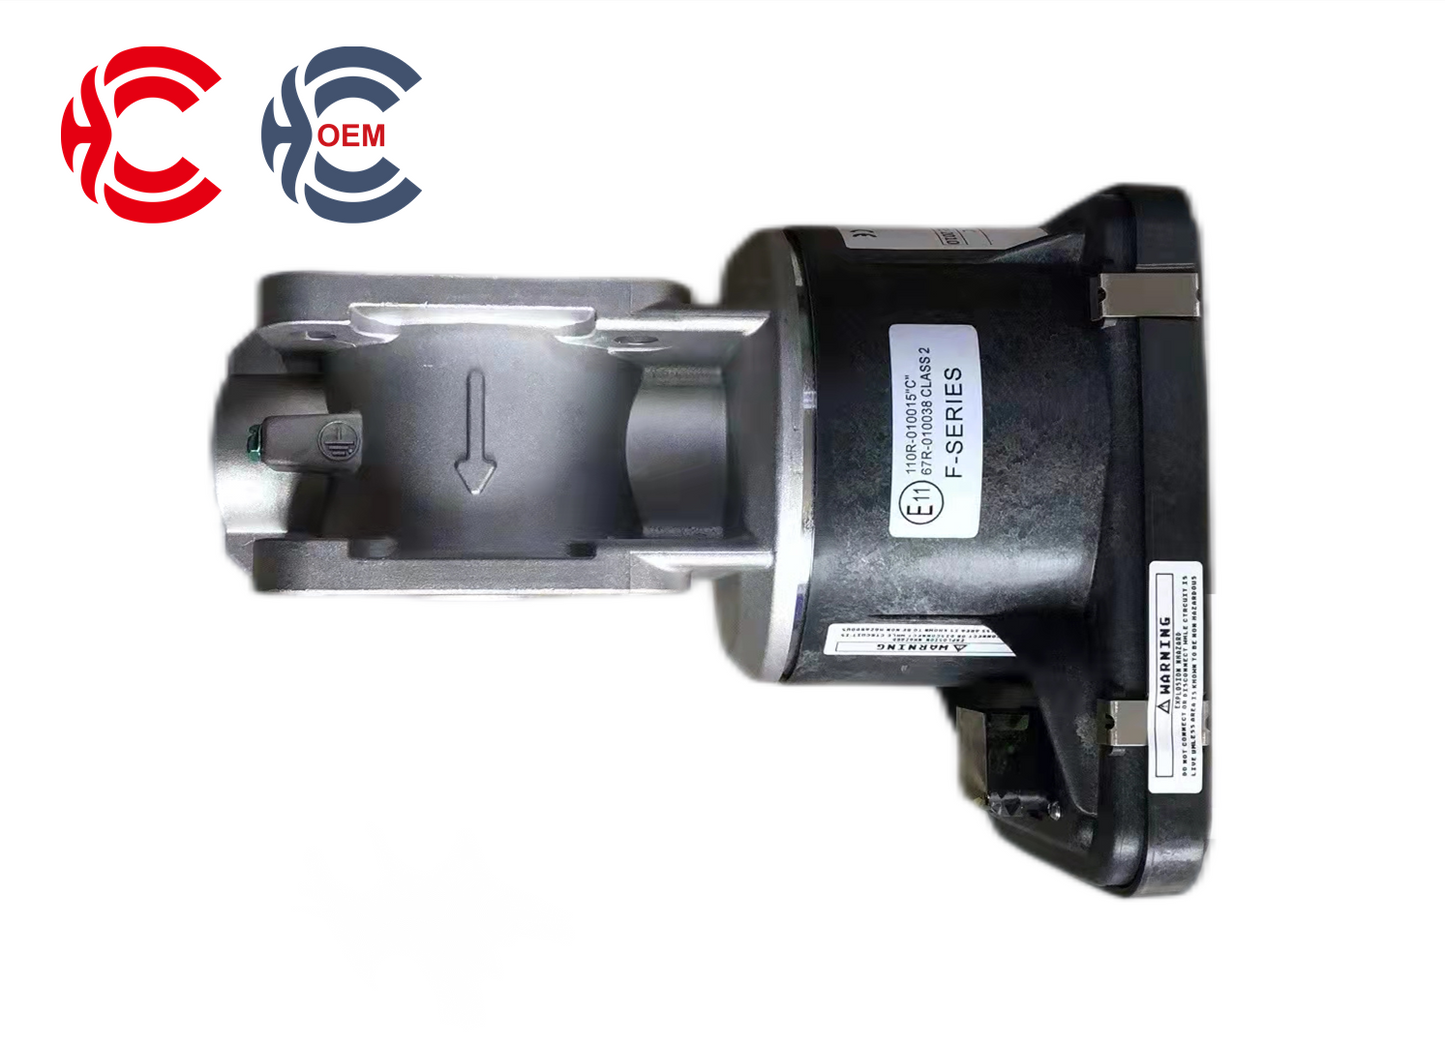 OEM: 612600190504 8235-678Material: ABS MetalColor: black silverOrigin: Made in ChinaWeight: 400gPacking List: 1* Electronic Throttle More ServiceWe can provide OEM Manufacturing serviceWe can Be your one-step solution for Auto PartsWe can provide technical scheme for you Feel Free to Contact Us, We will get back to you as soon as possible.